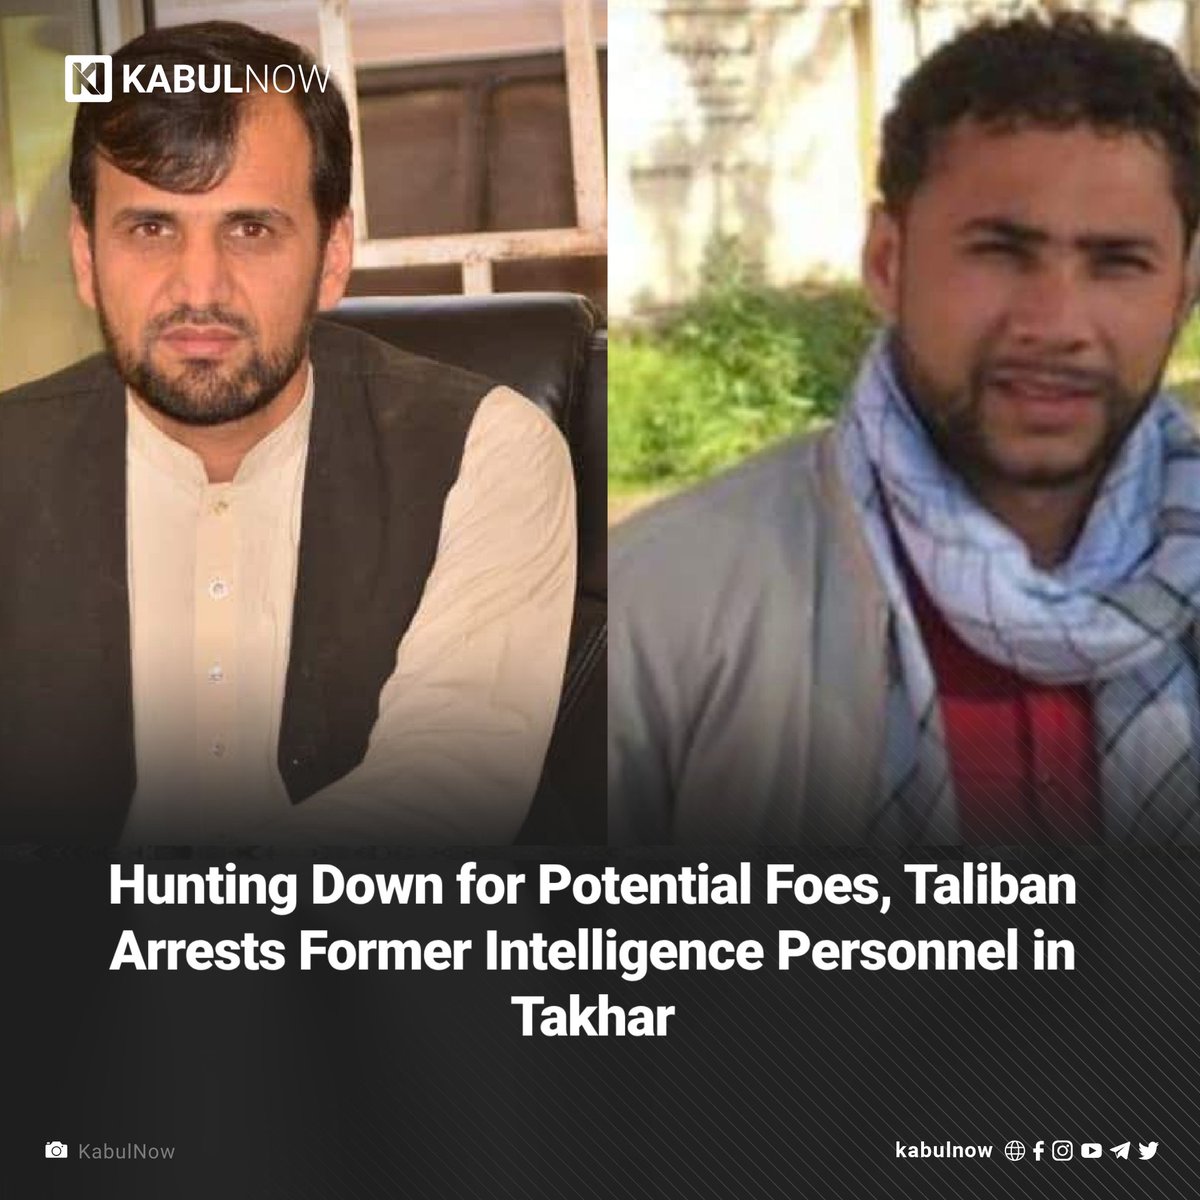 Local sources in Takhar report that Taliban intelligence in the province has detained two former personnel of the previous government’s national directorate of security. Read more here: kabulnow.com/2024/05/35686/